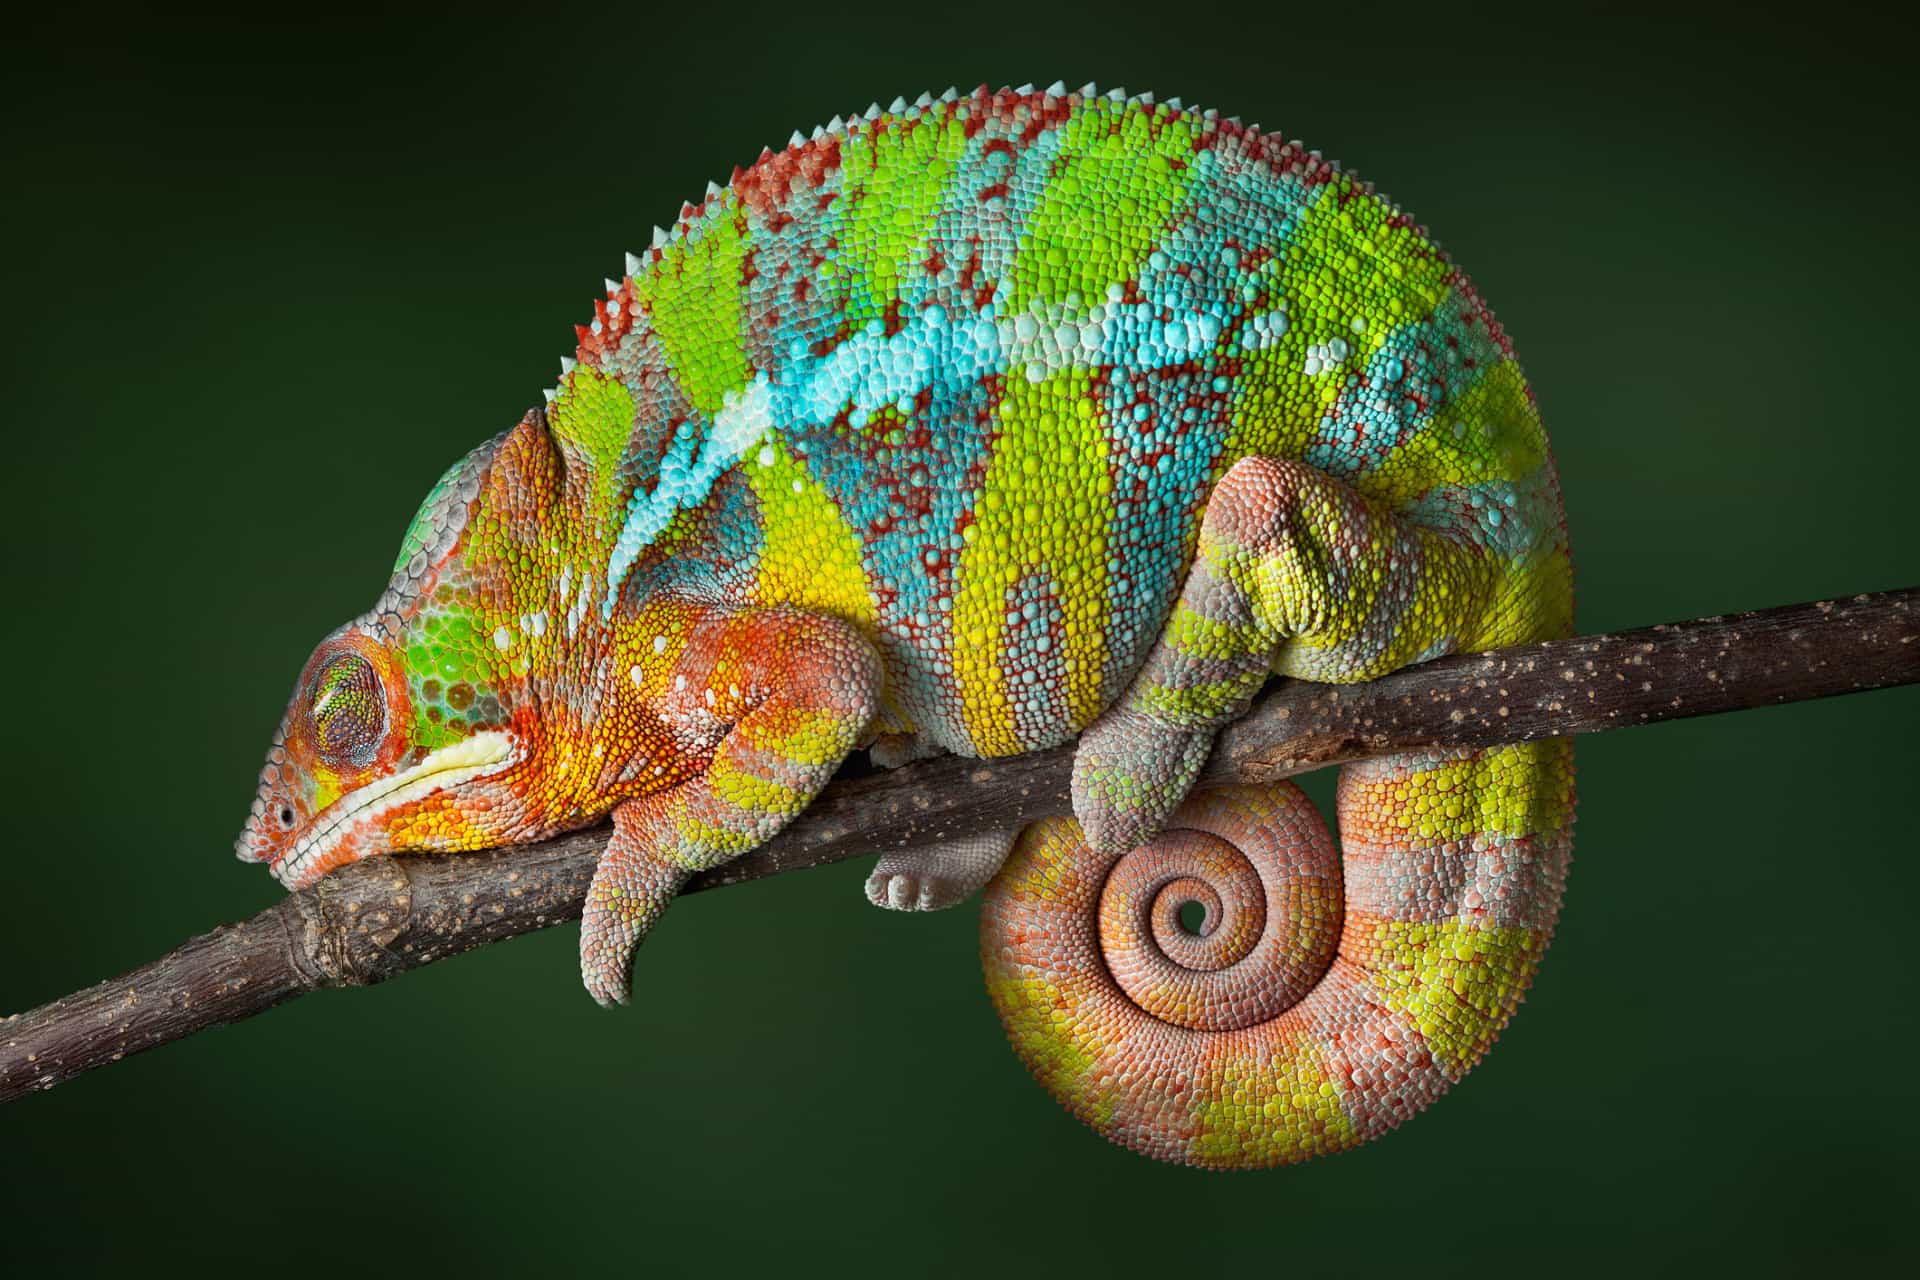 Possessing a vibrant, technicolor coat, this showy lizard is found in the eastern and northern areas of the island.